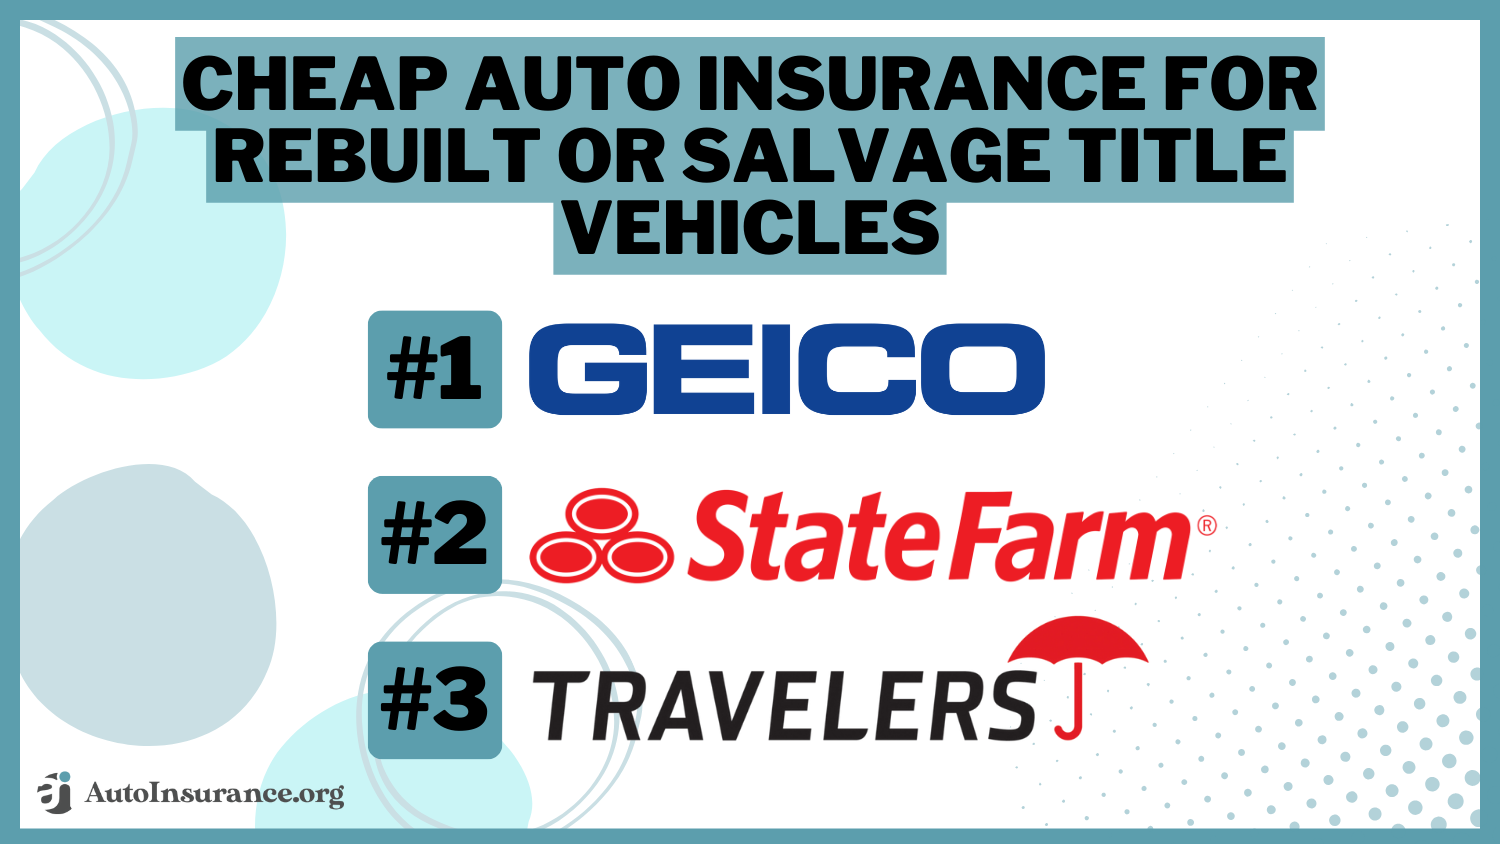 cheap auto insurance for rebuilt or salvage title vehicles: Geico, State Farm, Travelers